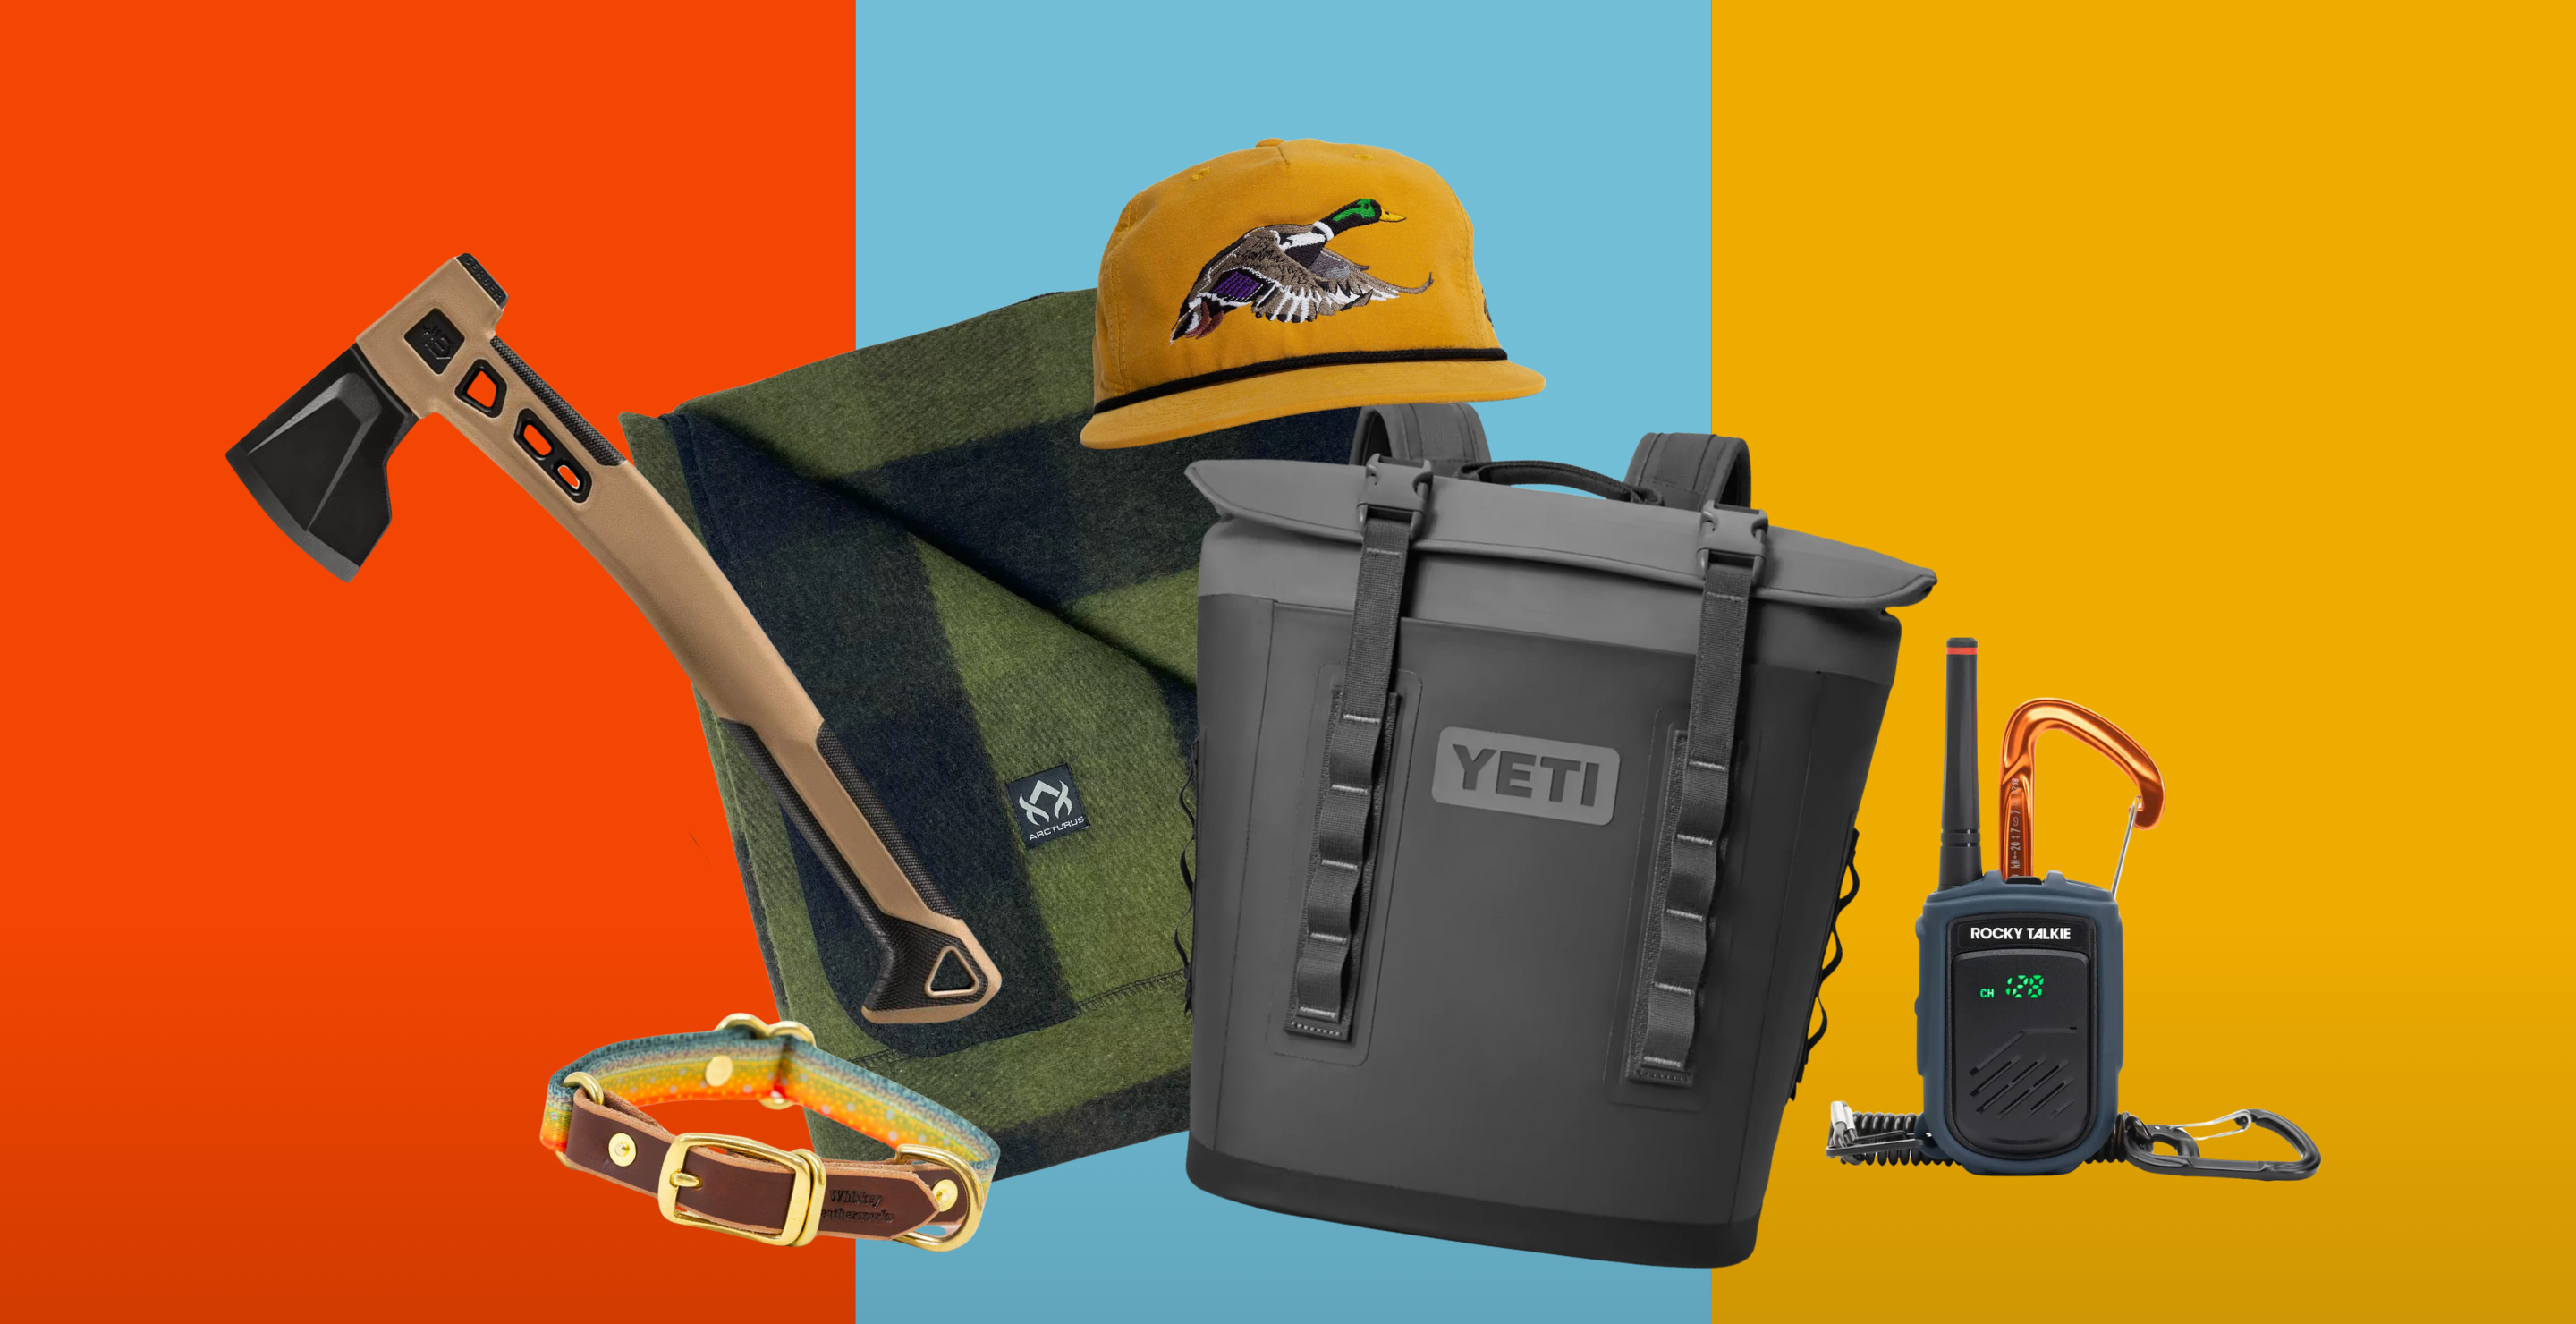 20 Practical Outdoor Gifts for Men, According to Our Gear Writers